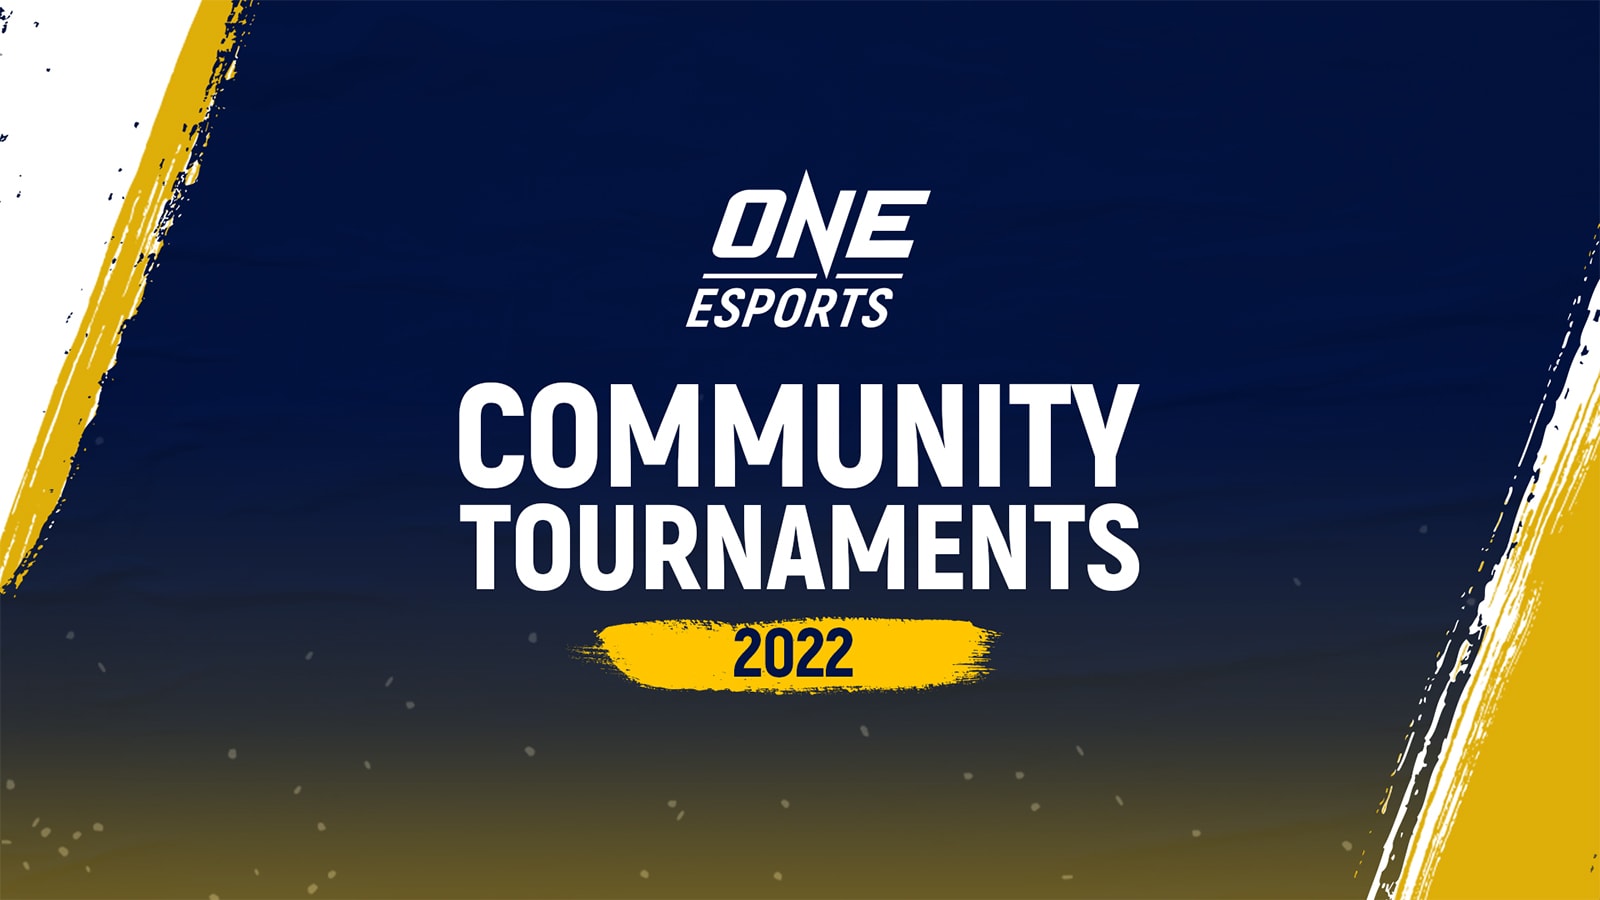 Join ONE Esports Community Tournaments and win cash prizes